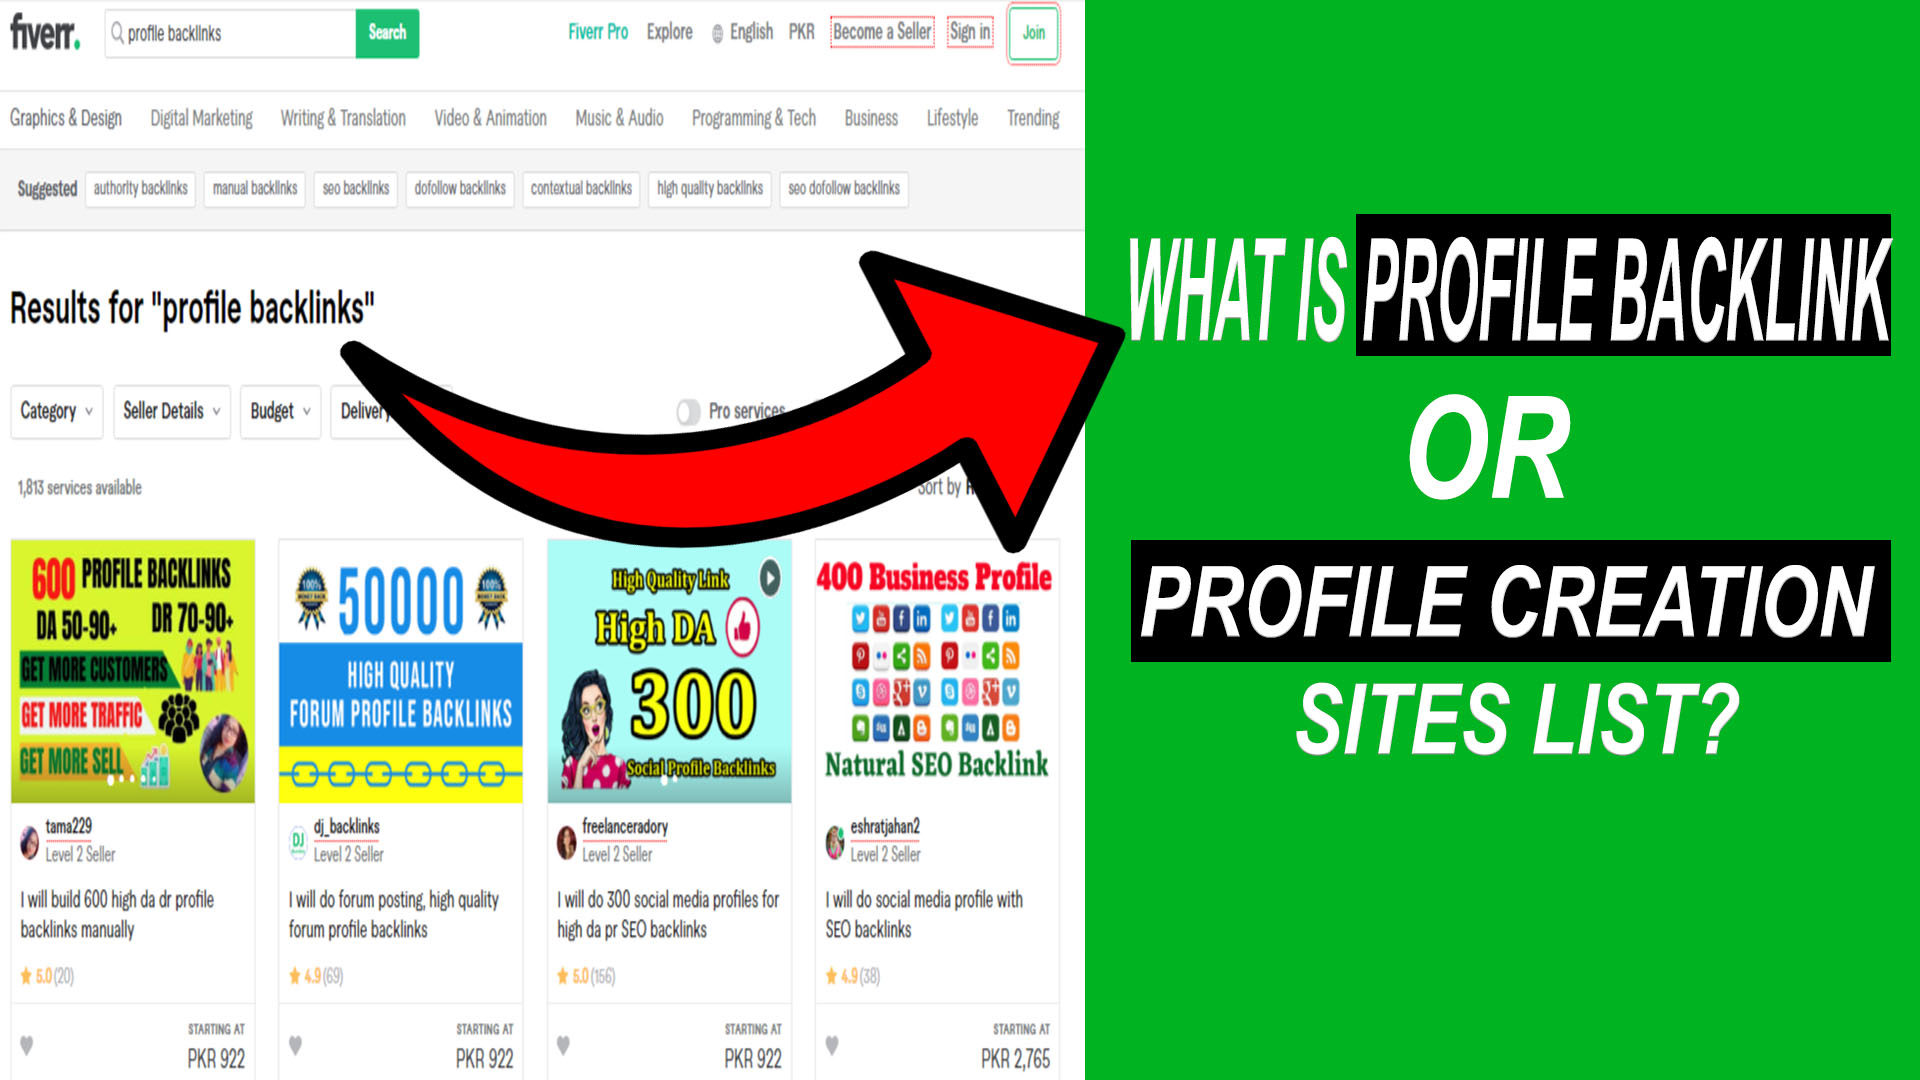 What is Profile Backlink or Profile Creation Sites List